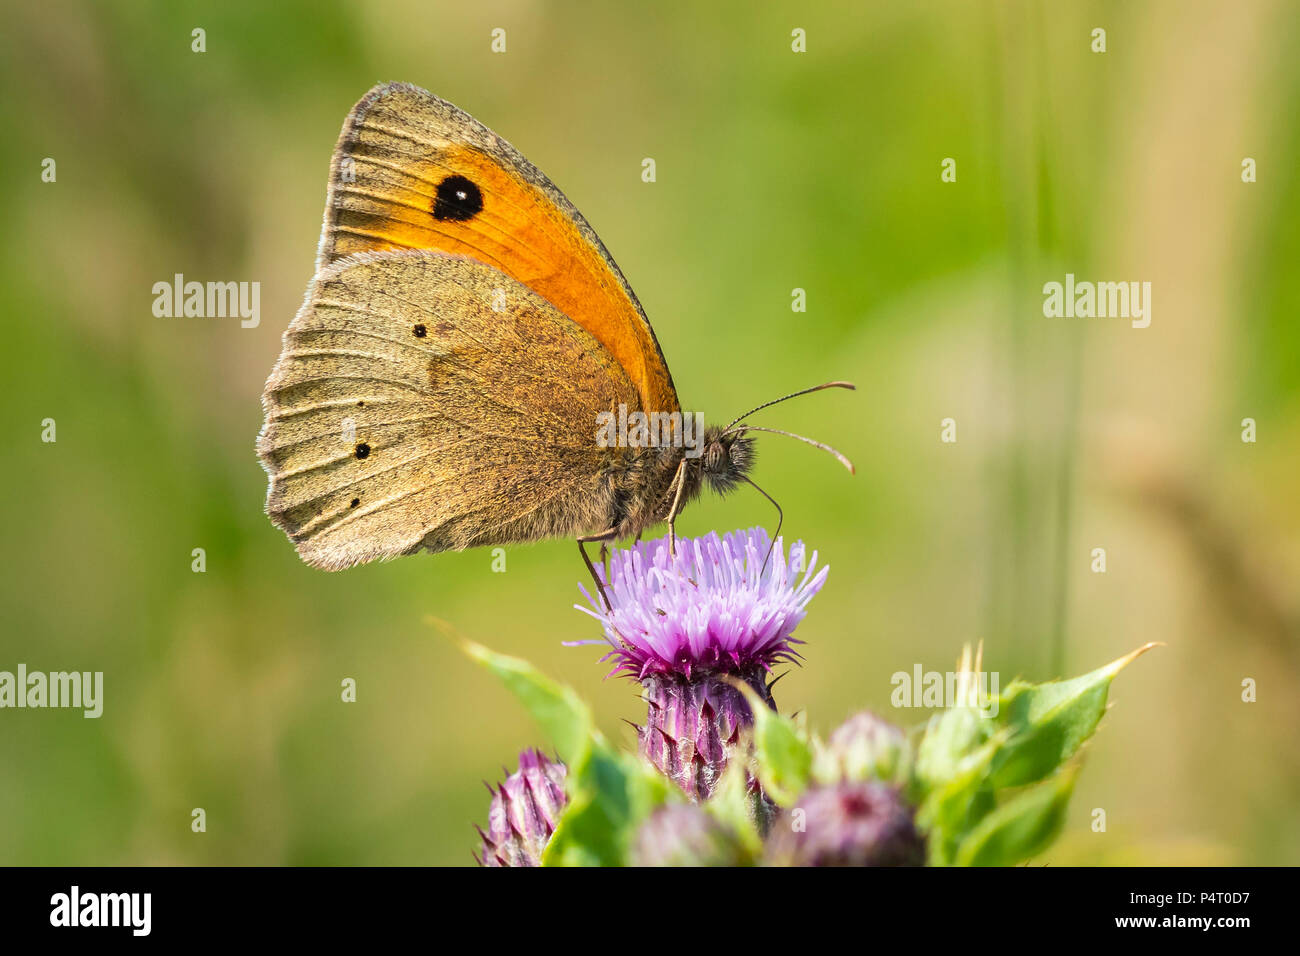 Side view wings close up of a Meadow Brown butterfly (Maniola jurtina) feeding on a purple Thistle flower Stock Photo